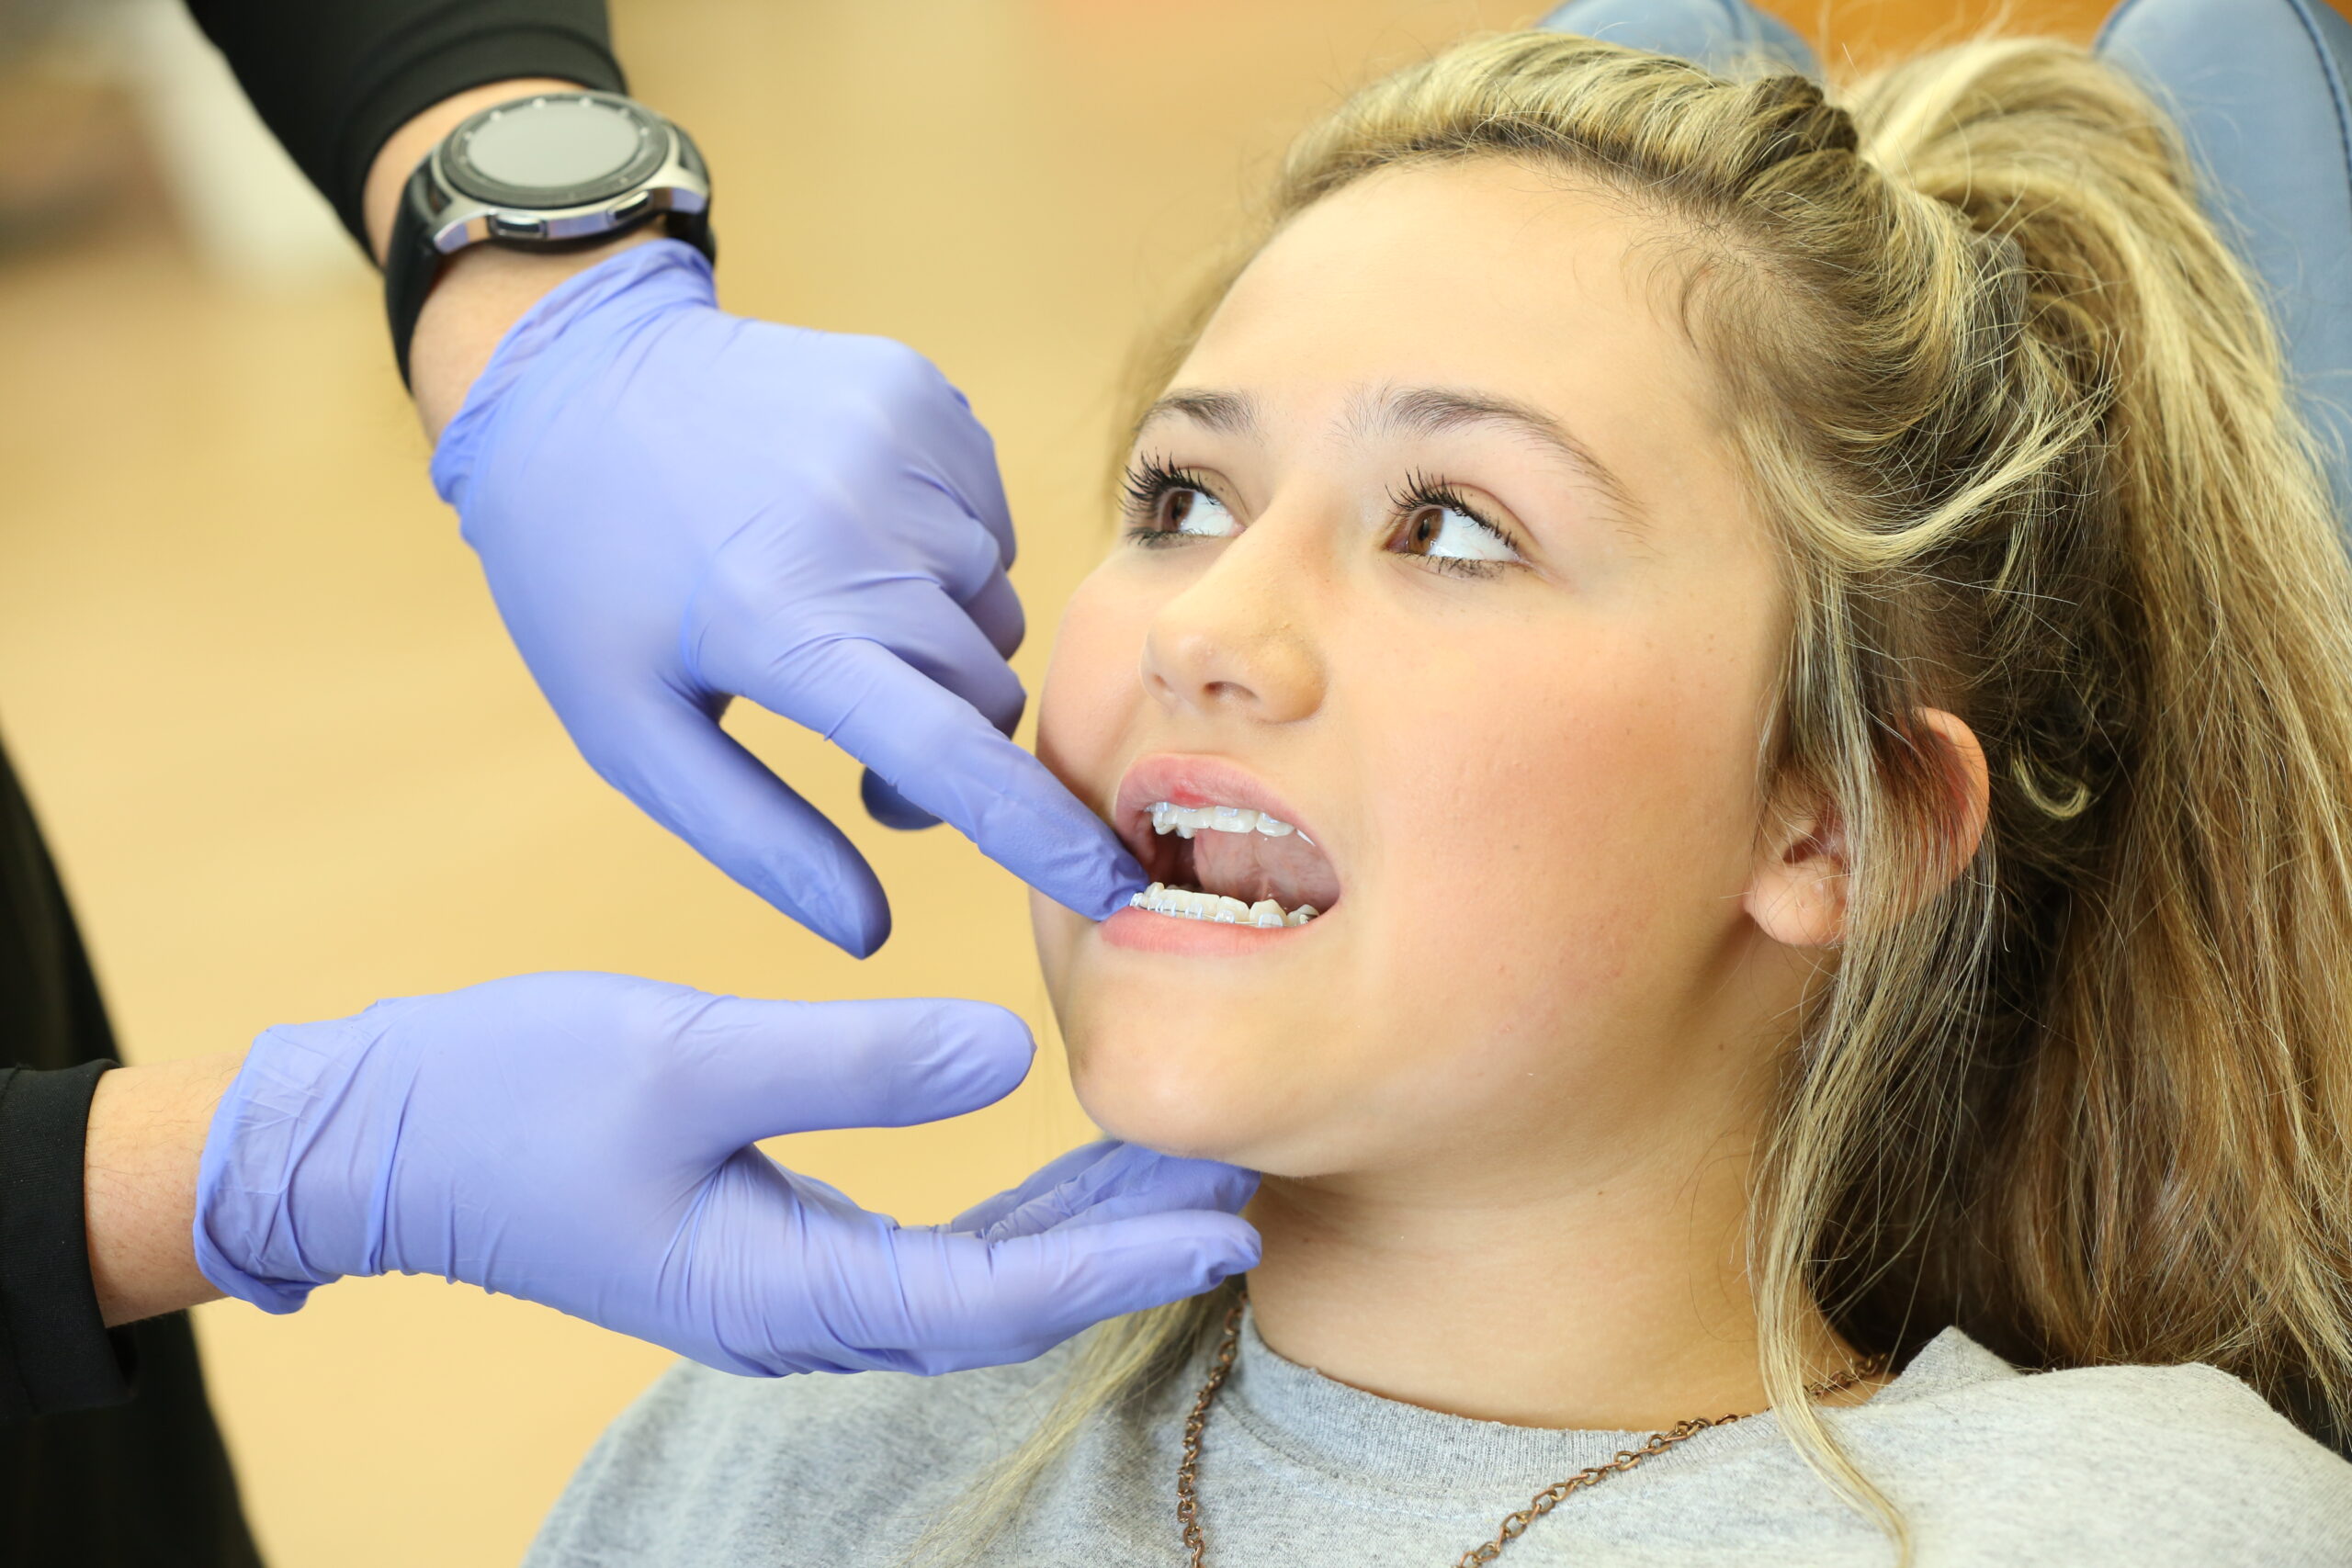 Tooth Extraction before Orthodontic Treatment